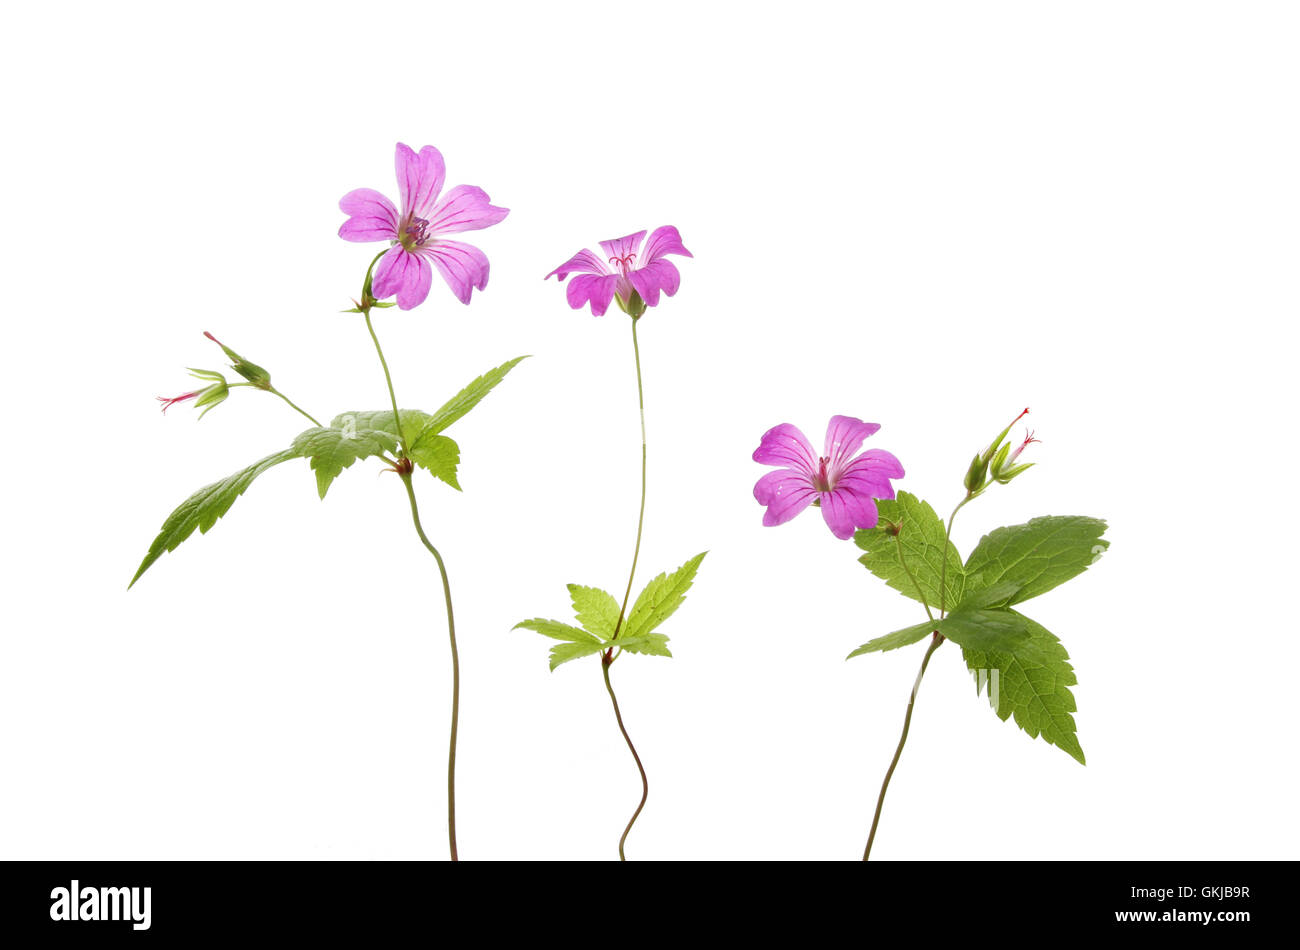 Crane's bill Geranium flowers and foliage isolated against white Stock Photo